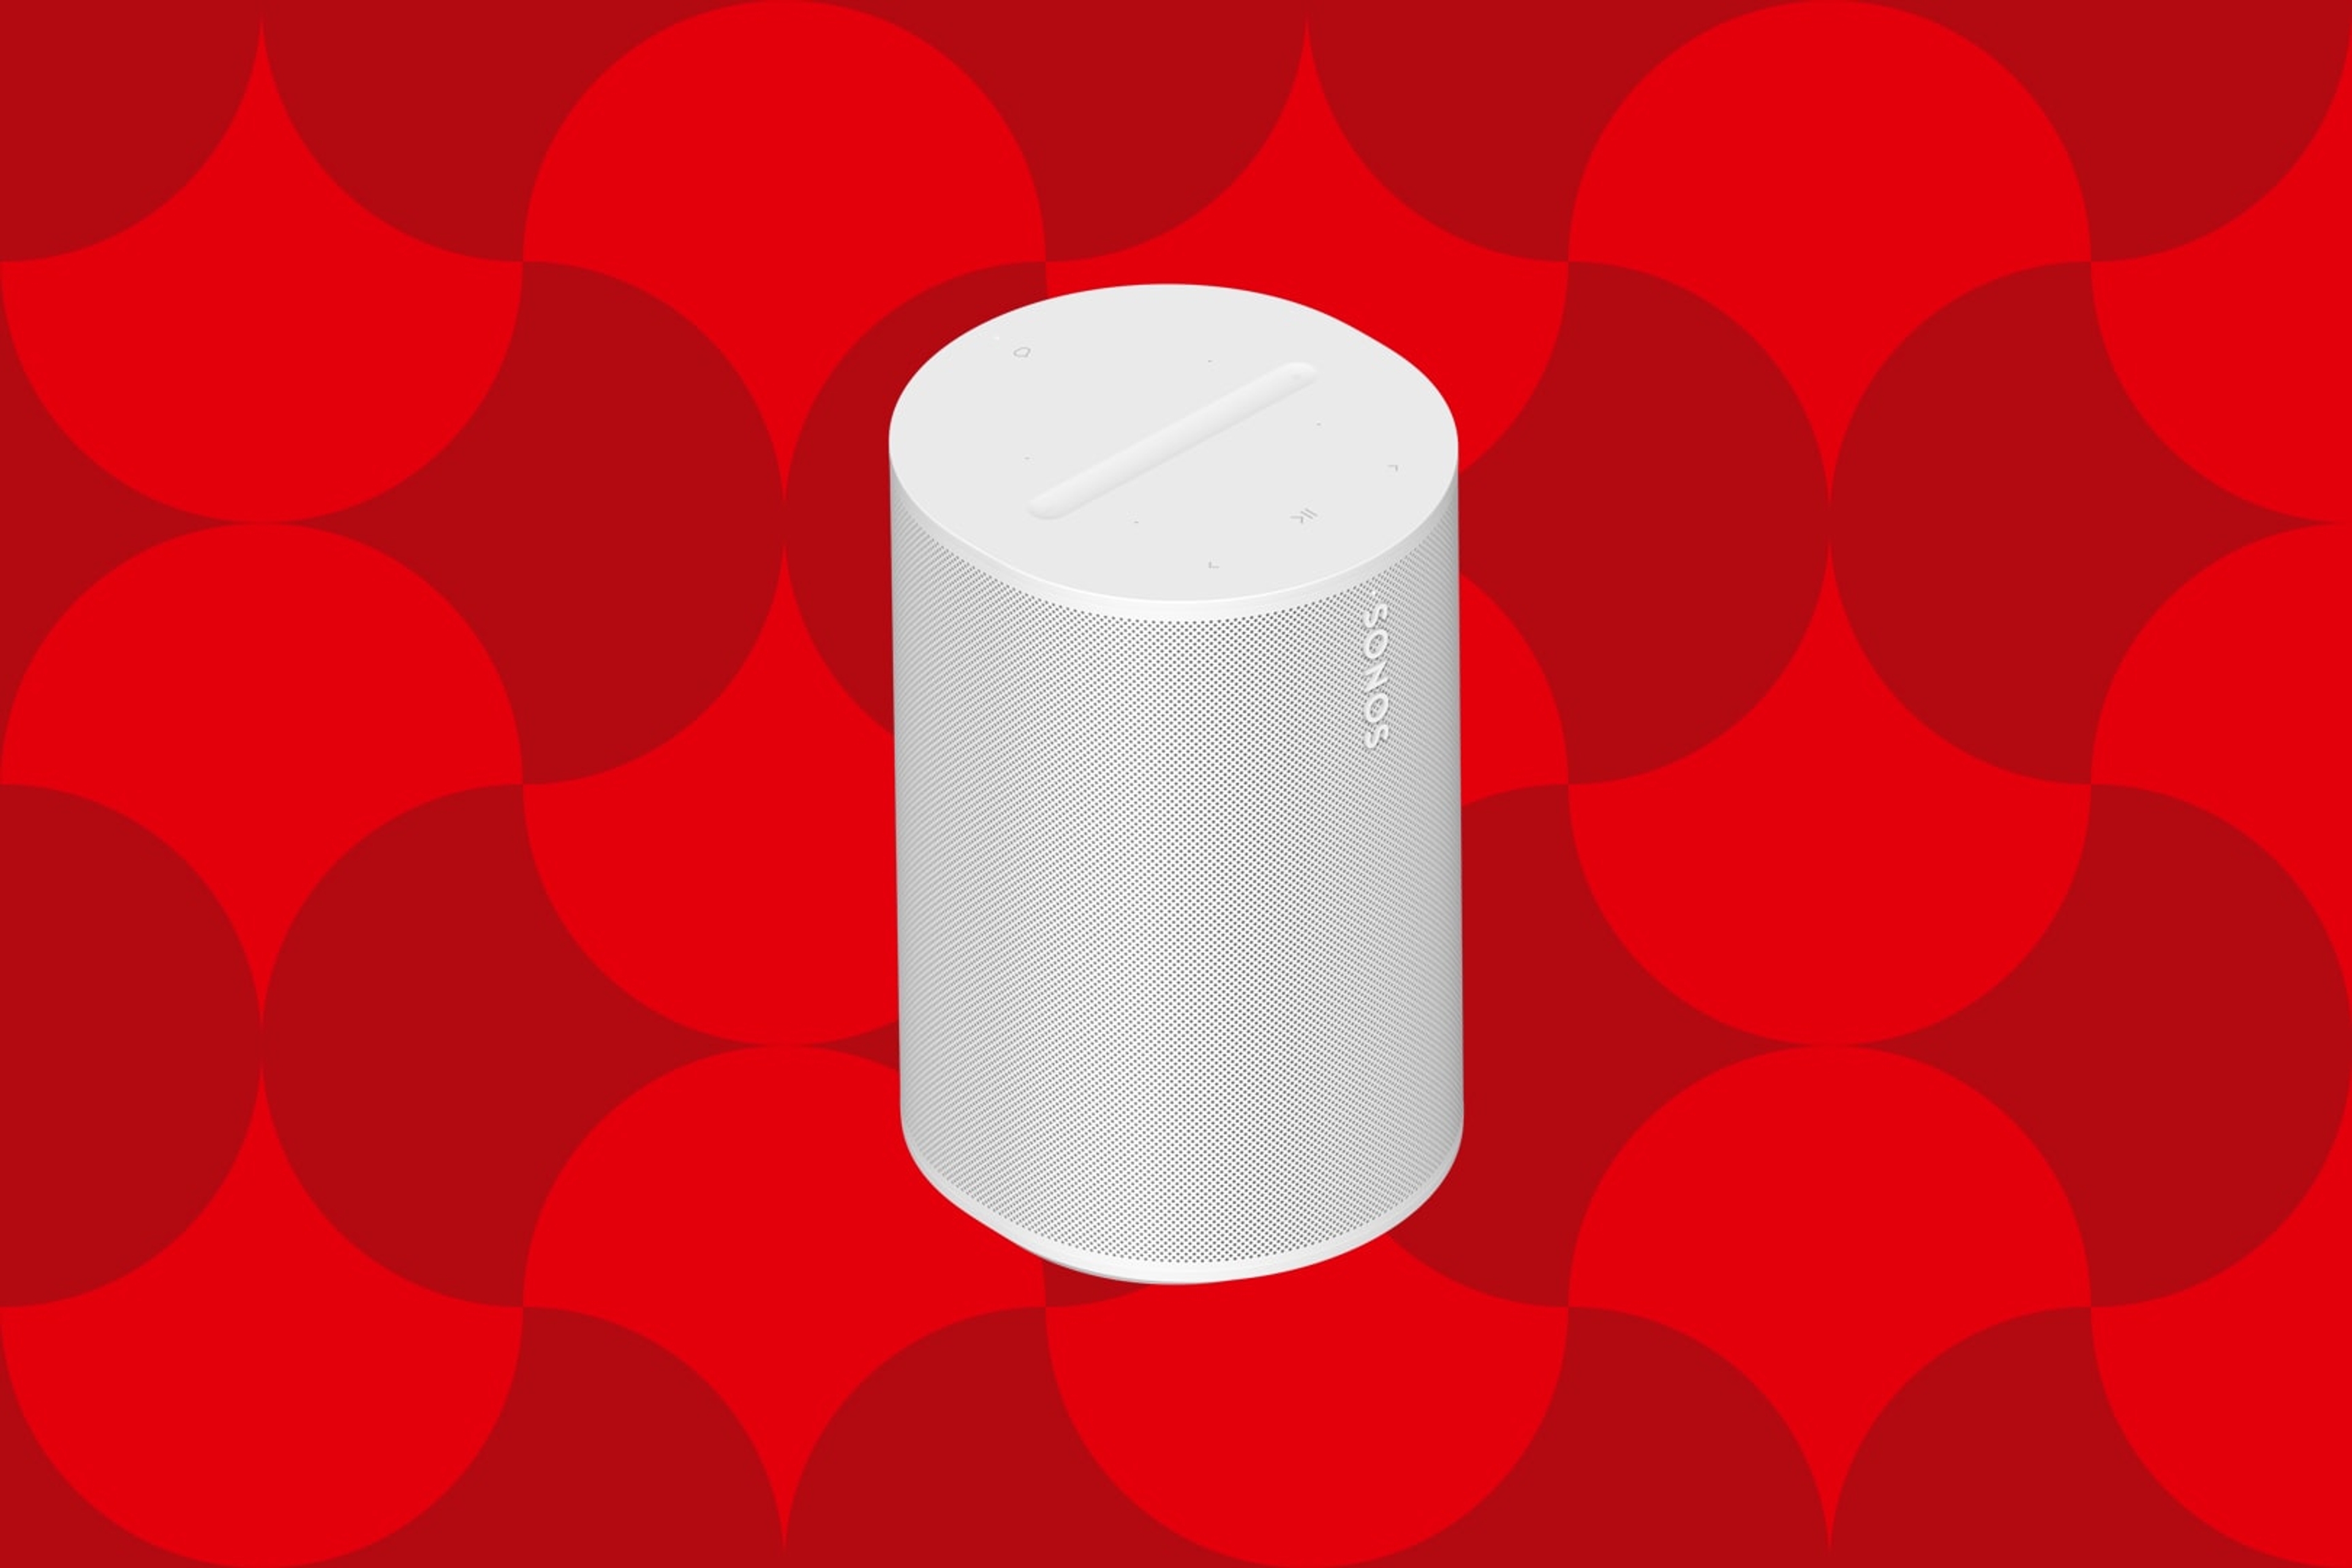 Image of a white Sonos Era 100 speaker on a red graphic holiday background